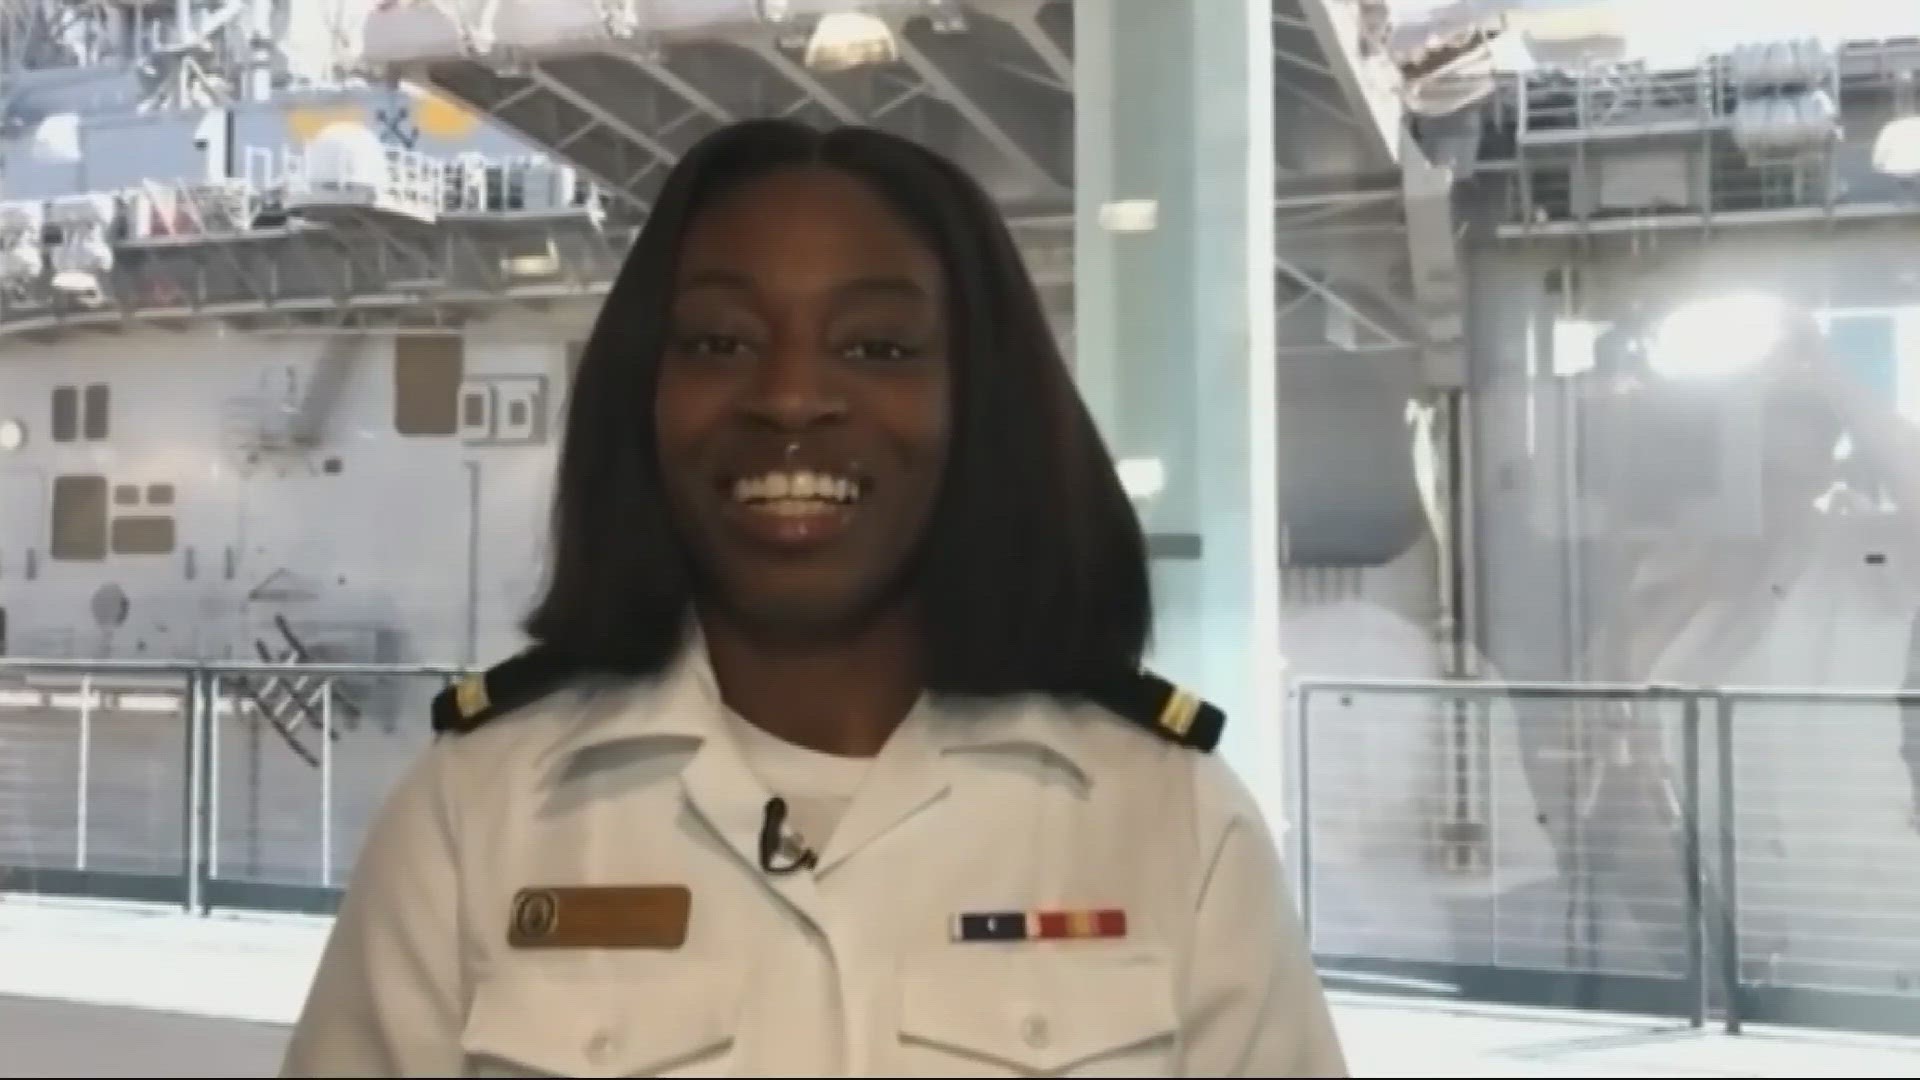 Ensign Jaliya Wilson serves aboard the USS Wasp in the United States Navy.